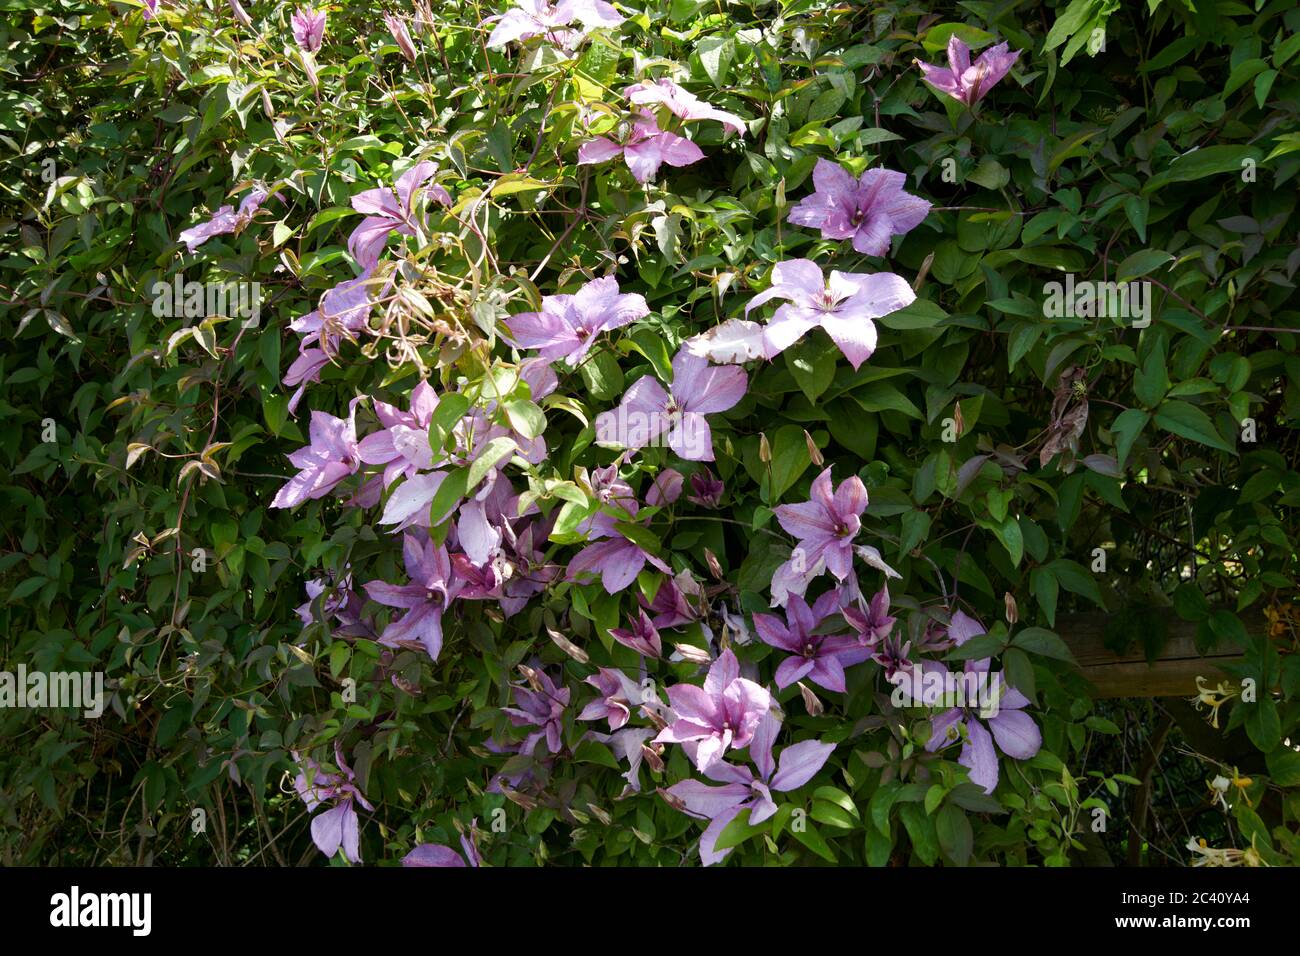 Clematis viticella, Syn, Italian leather flower. Stock Photo